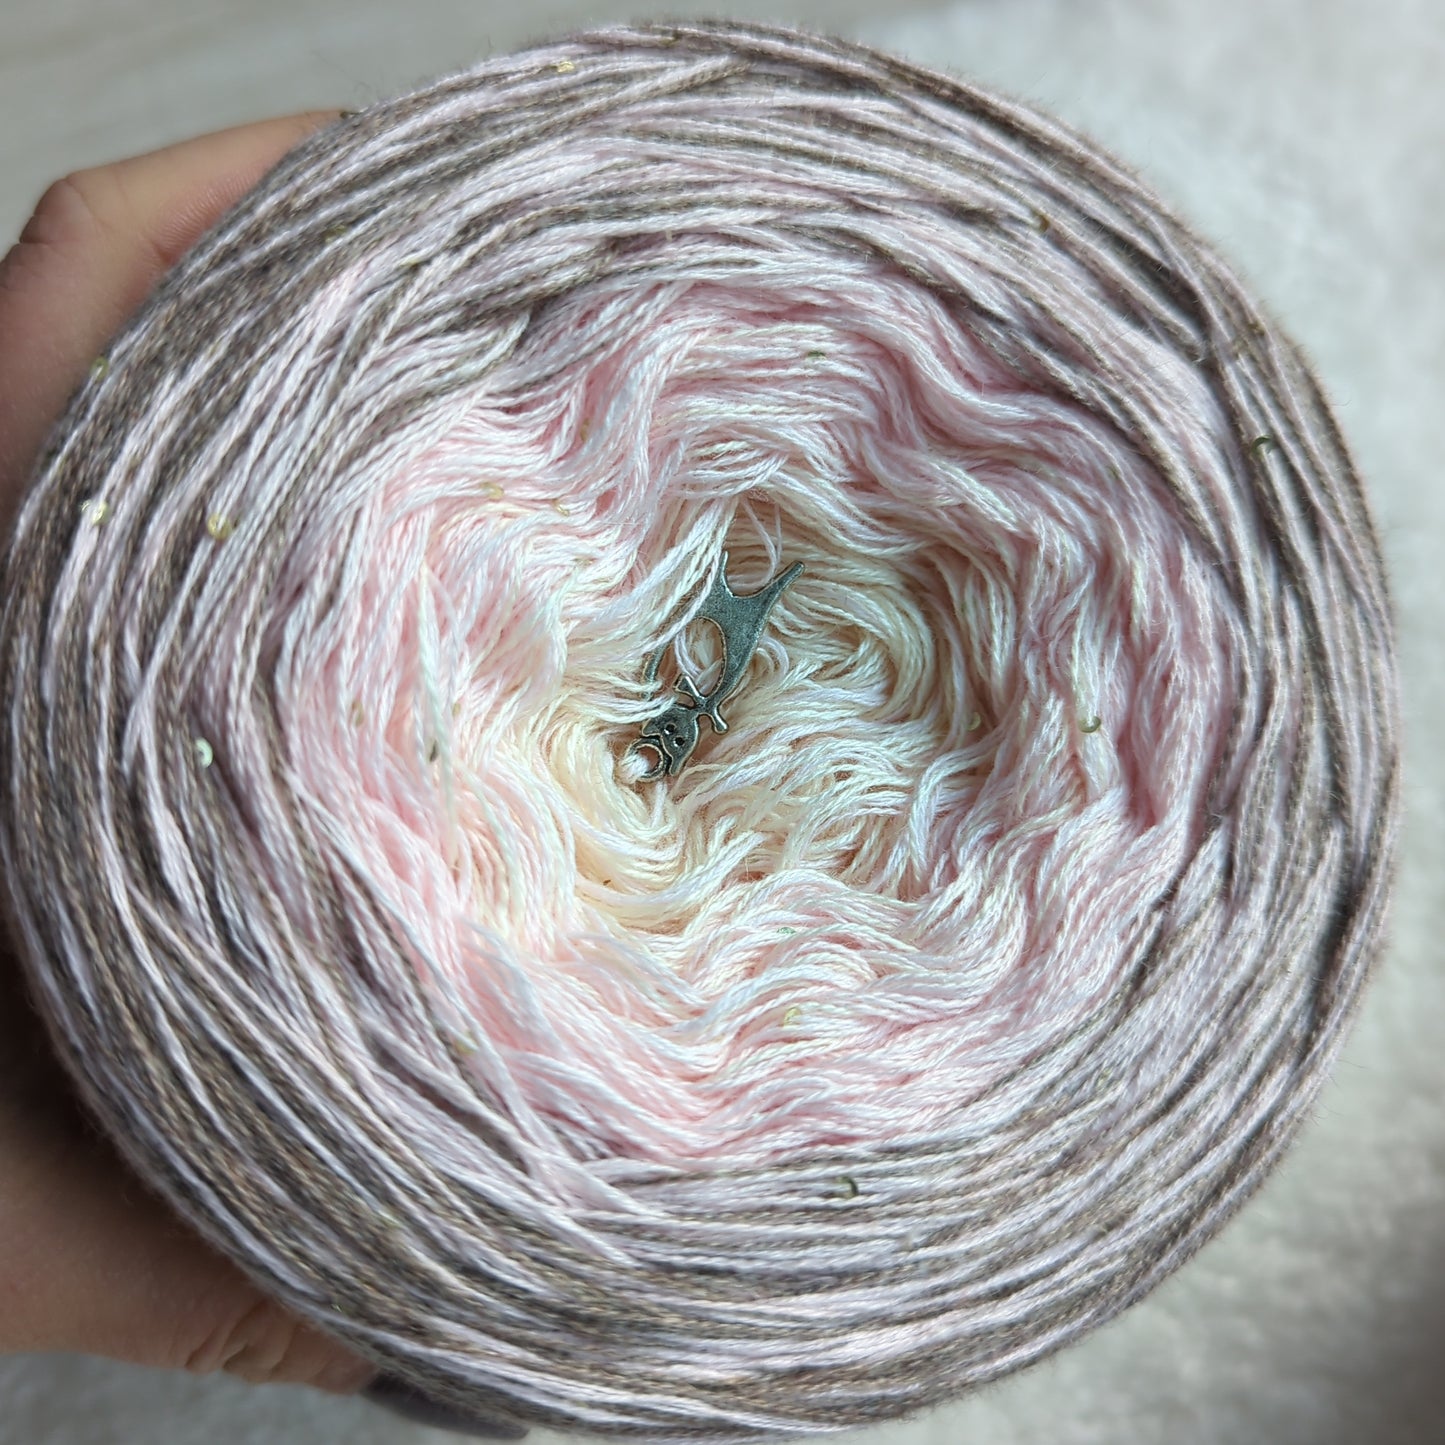 CW018 cotton/merino ombre yarn cake, 270g, about 800m, 3ply plus additional thread